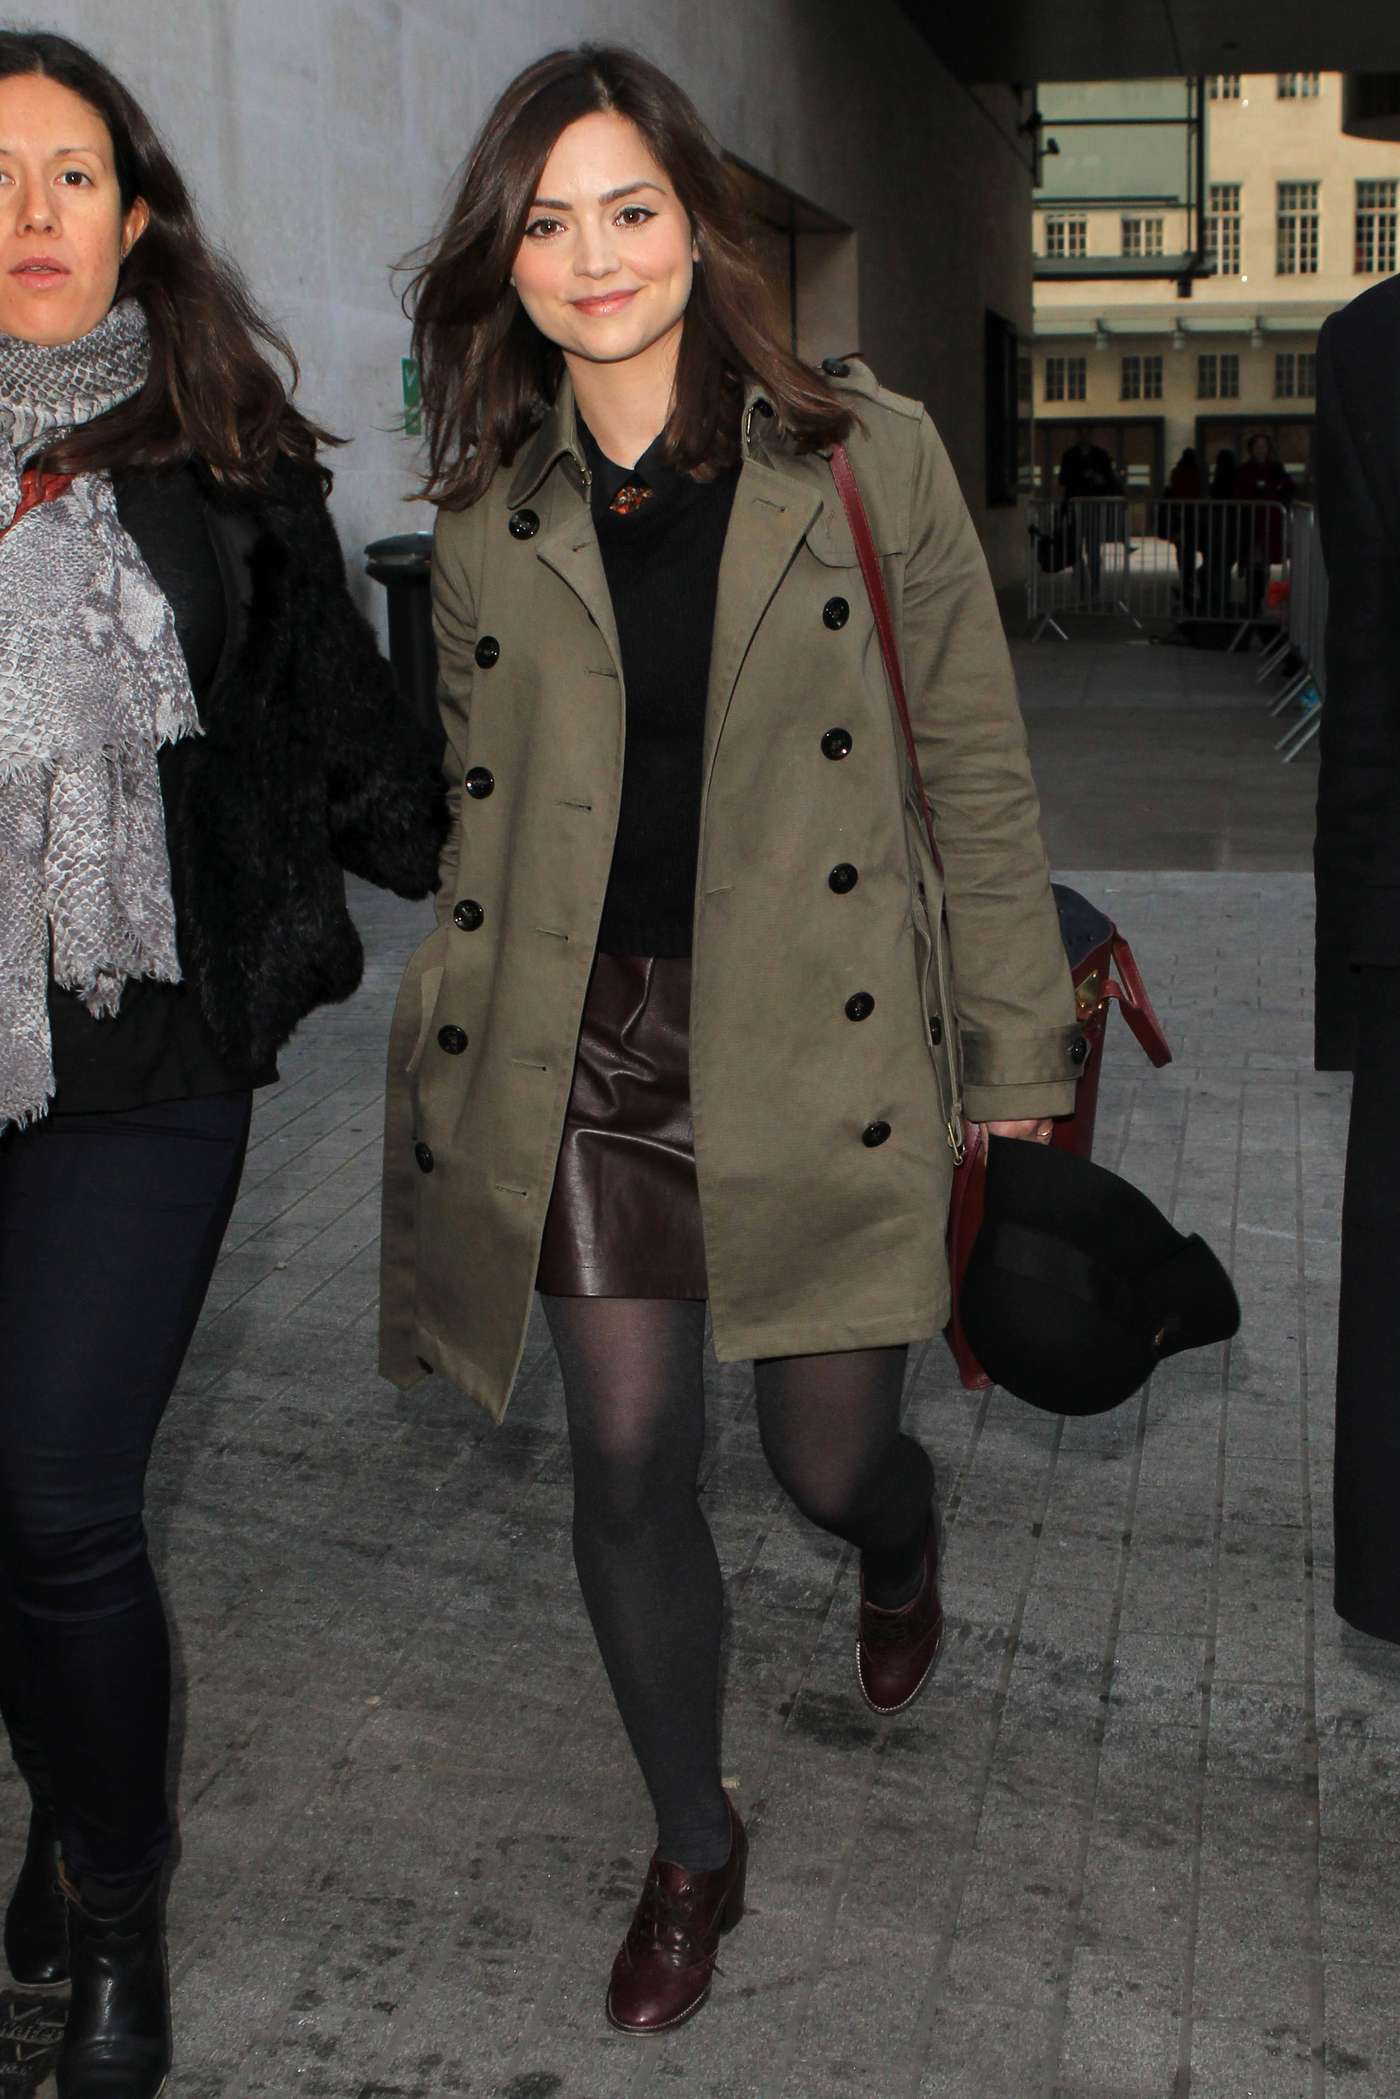 Jenna Louise Coleman arriving at BBC Radio 1 in London